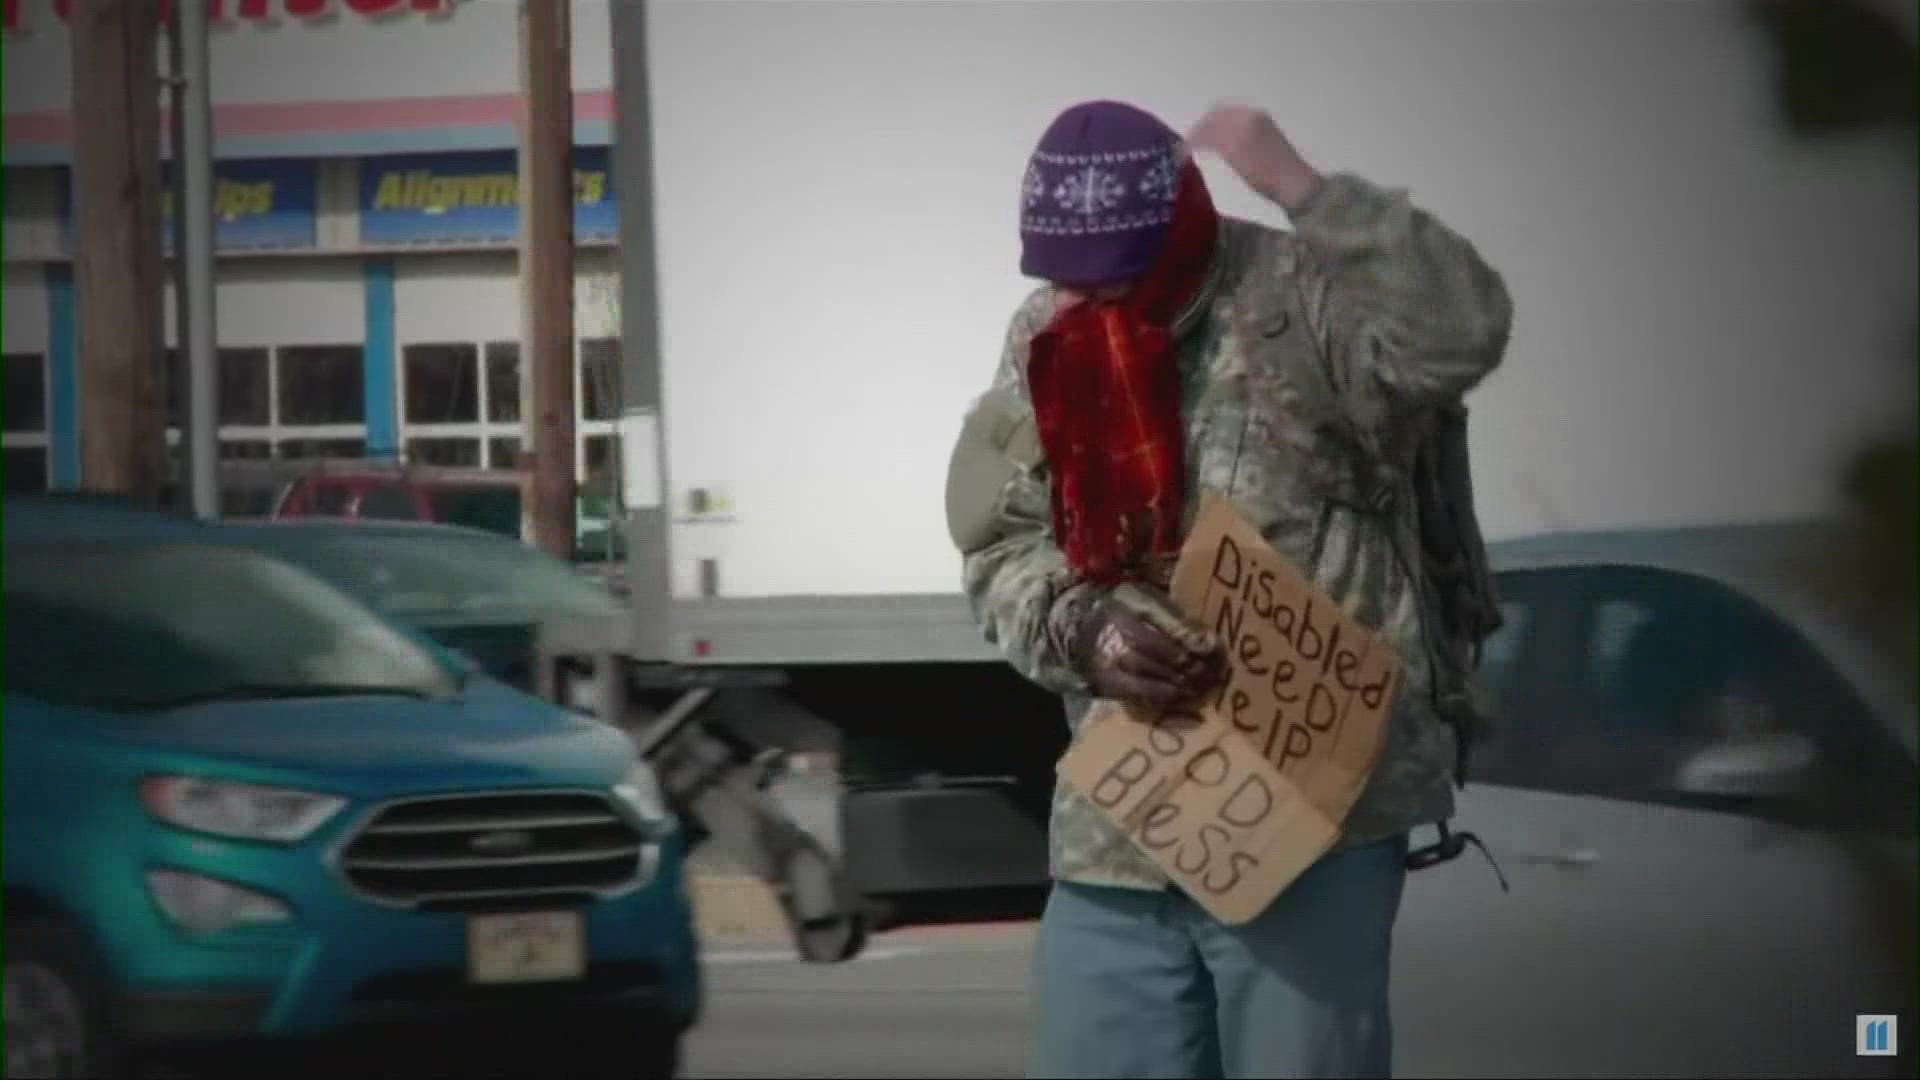 The rise in foot traffic throughout the downtown area will also see a rise in panhandling.